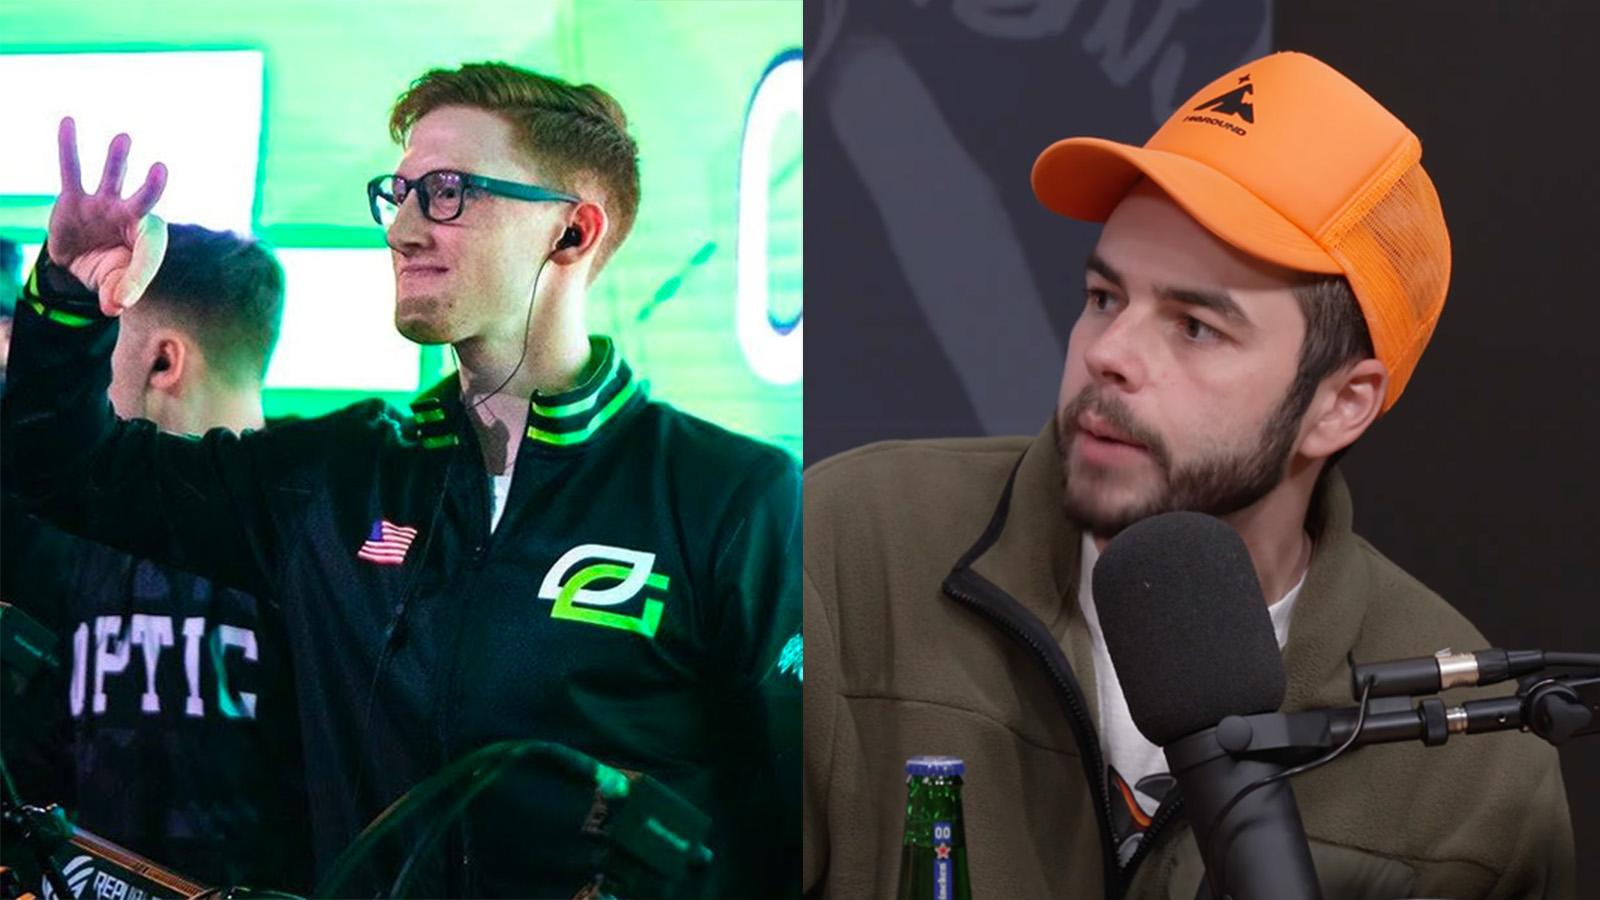 Scump on stage next to Nadeshot on podcast